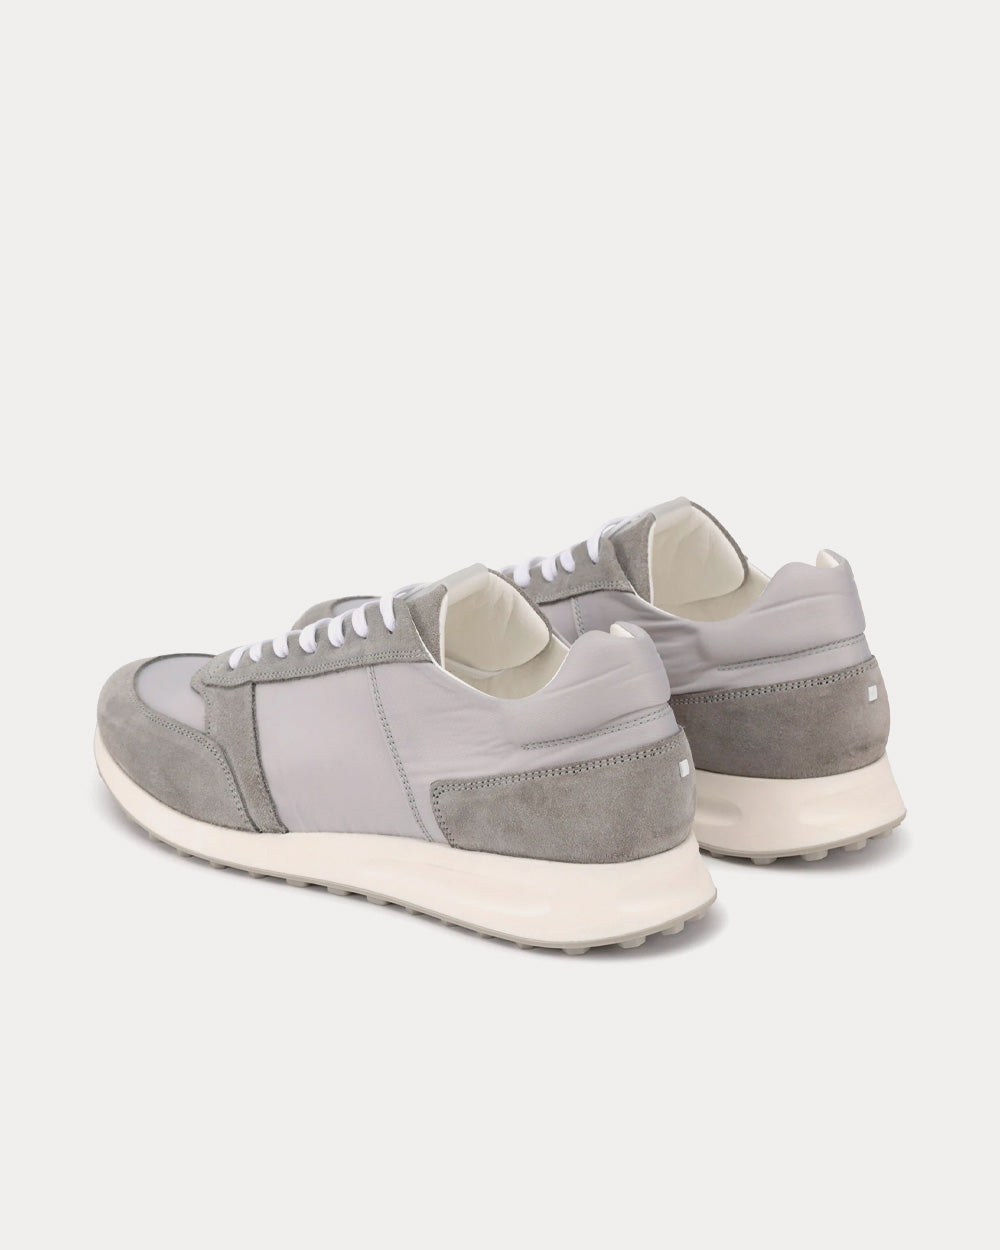 ETQ - RS 01 NYLN Light Grey / White Low Top Sneakers